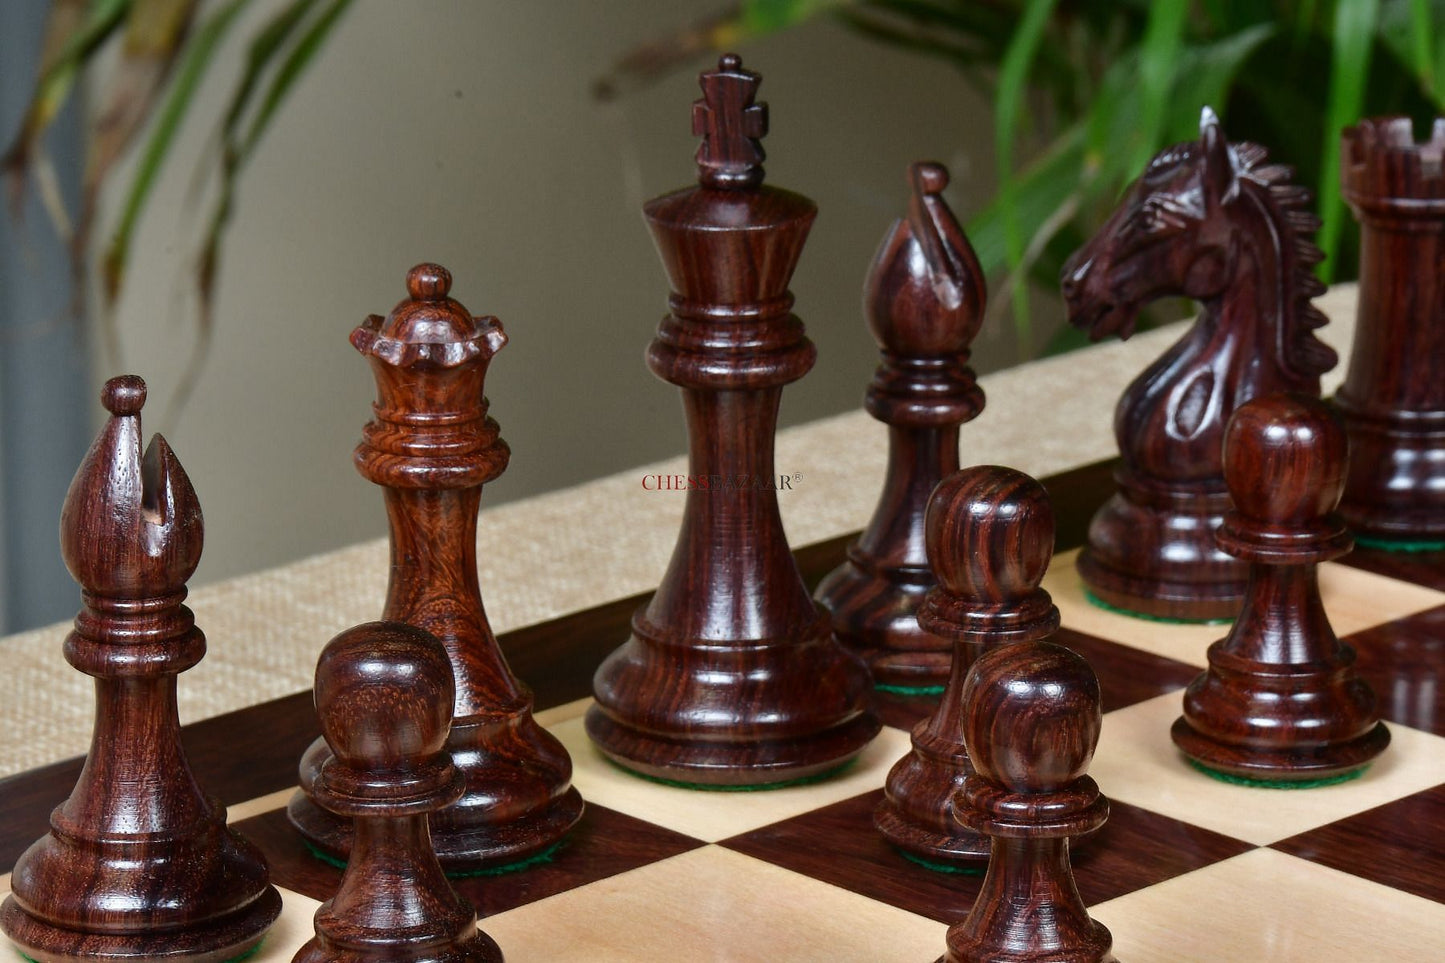 Derby Knight Staunton Weighted Chess Pieces in Rosewood & Boxwood - 4.1" King